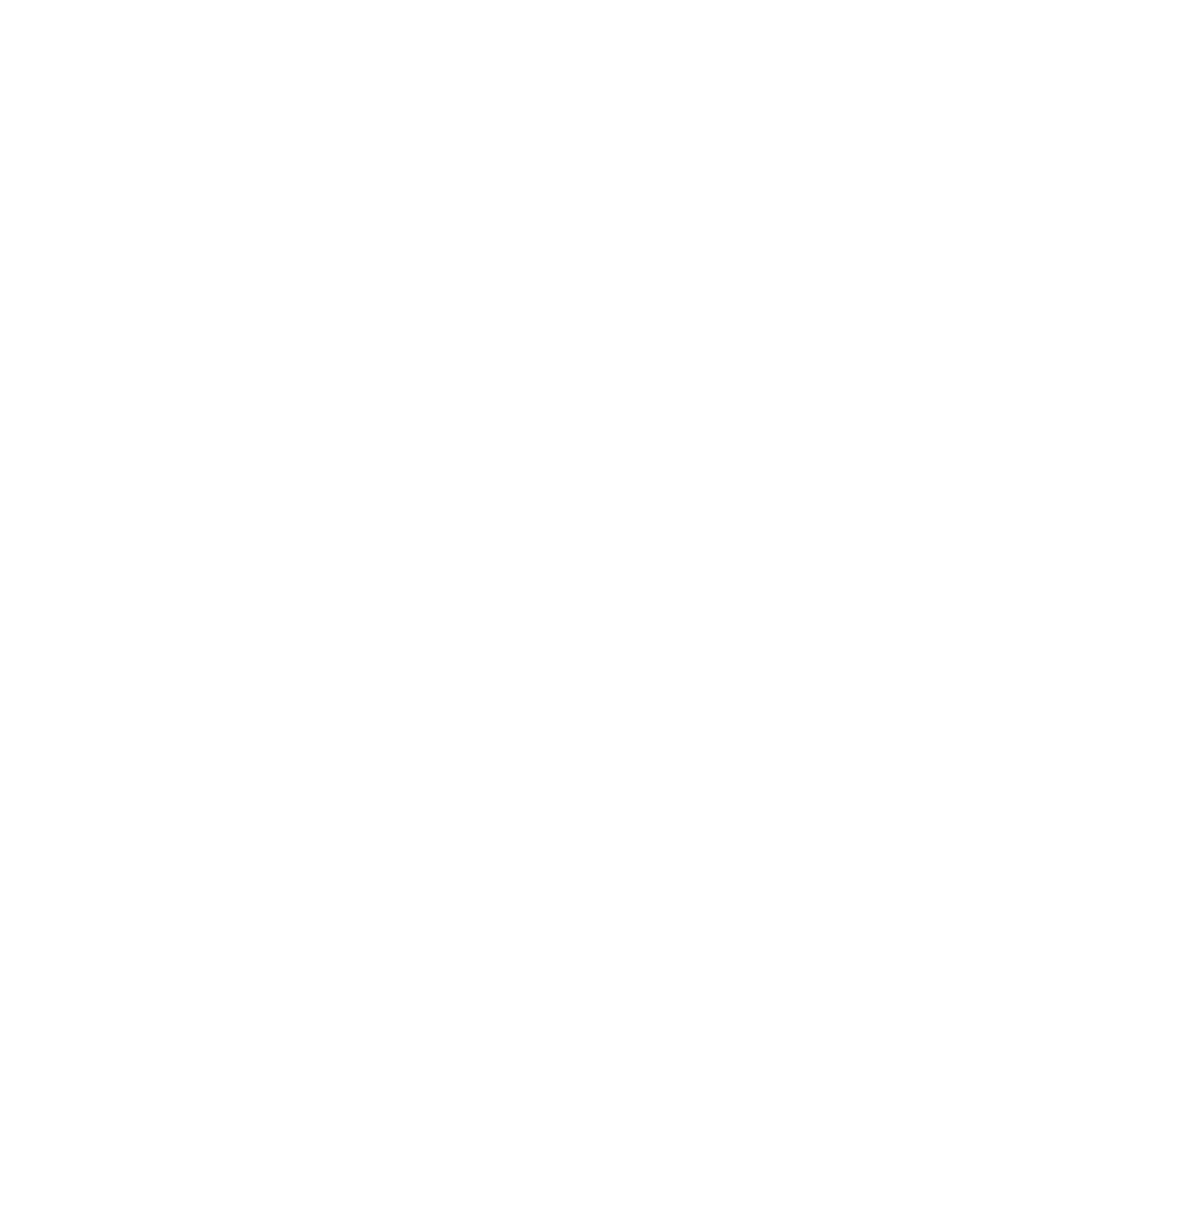 We As One